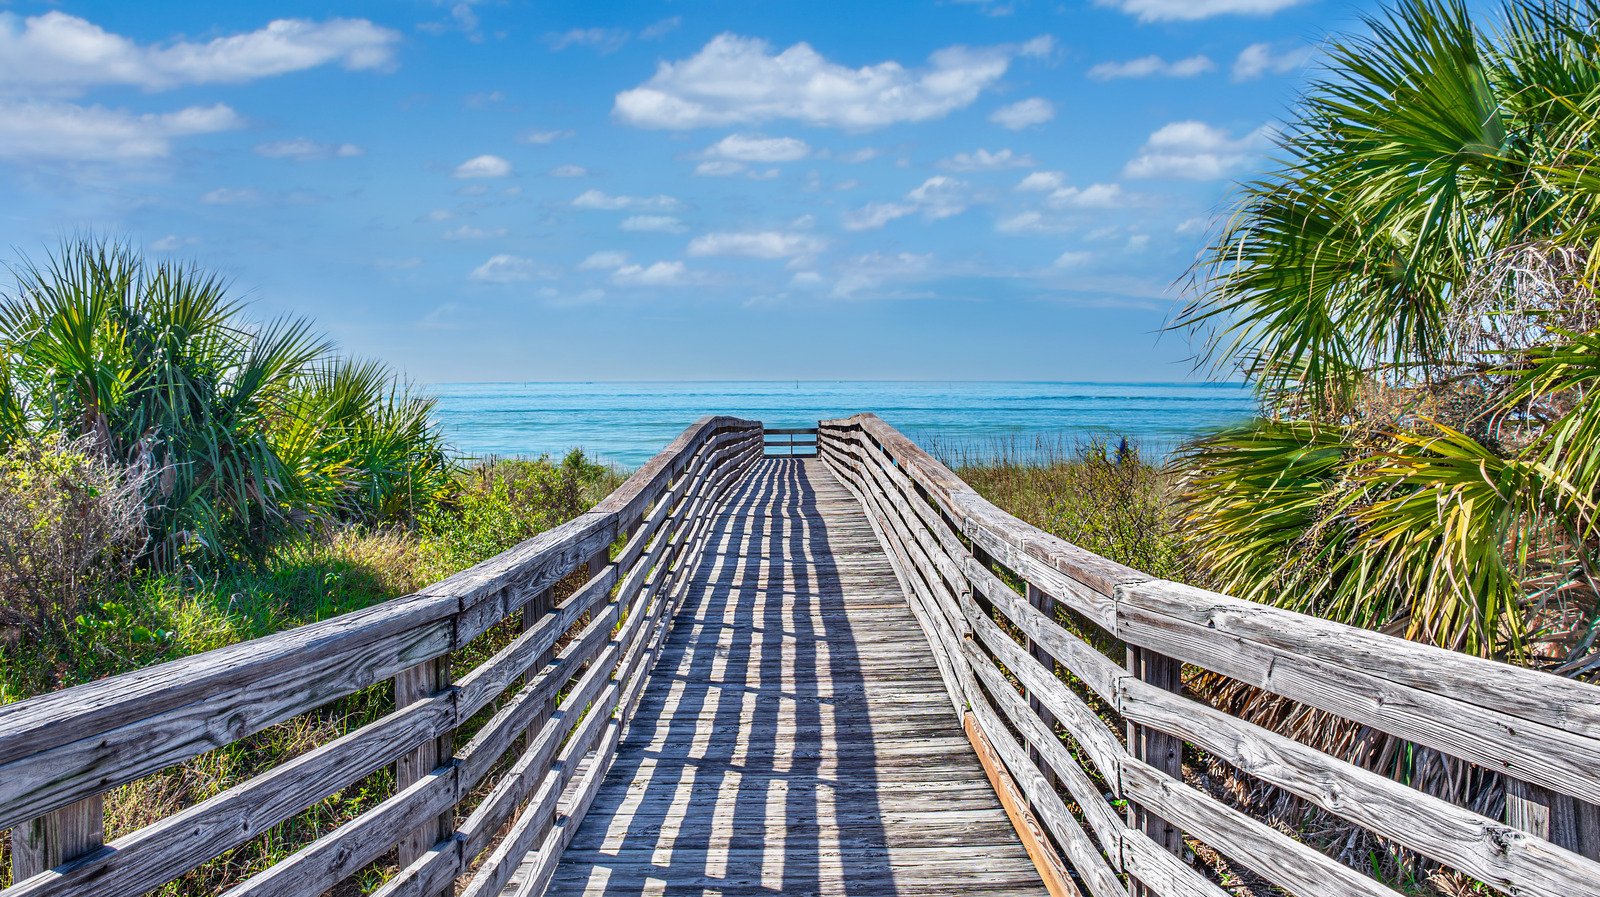 Escape The Cold This Winter With A Trip To This Underrated Florida State Park